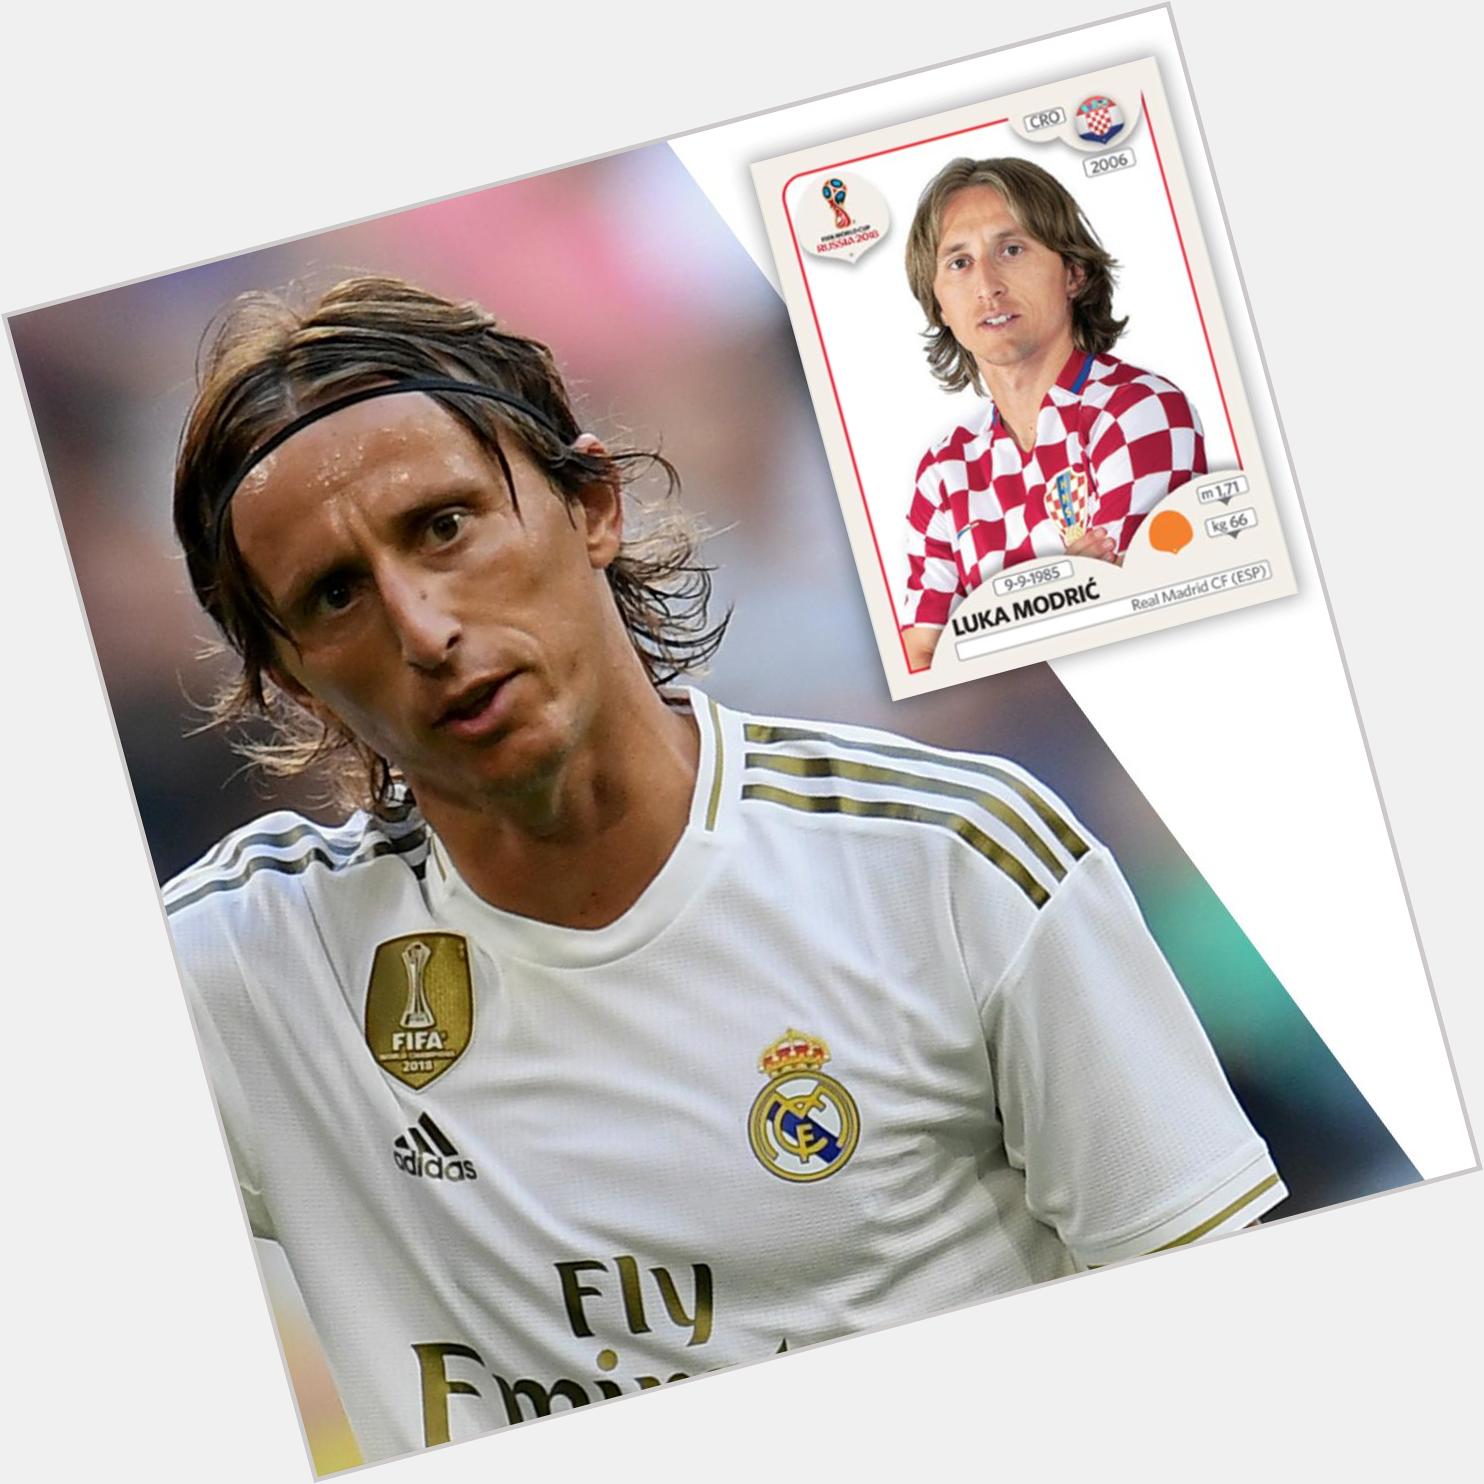 Happy birthday, Luka Modric!!!
34 candles for you!!! 